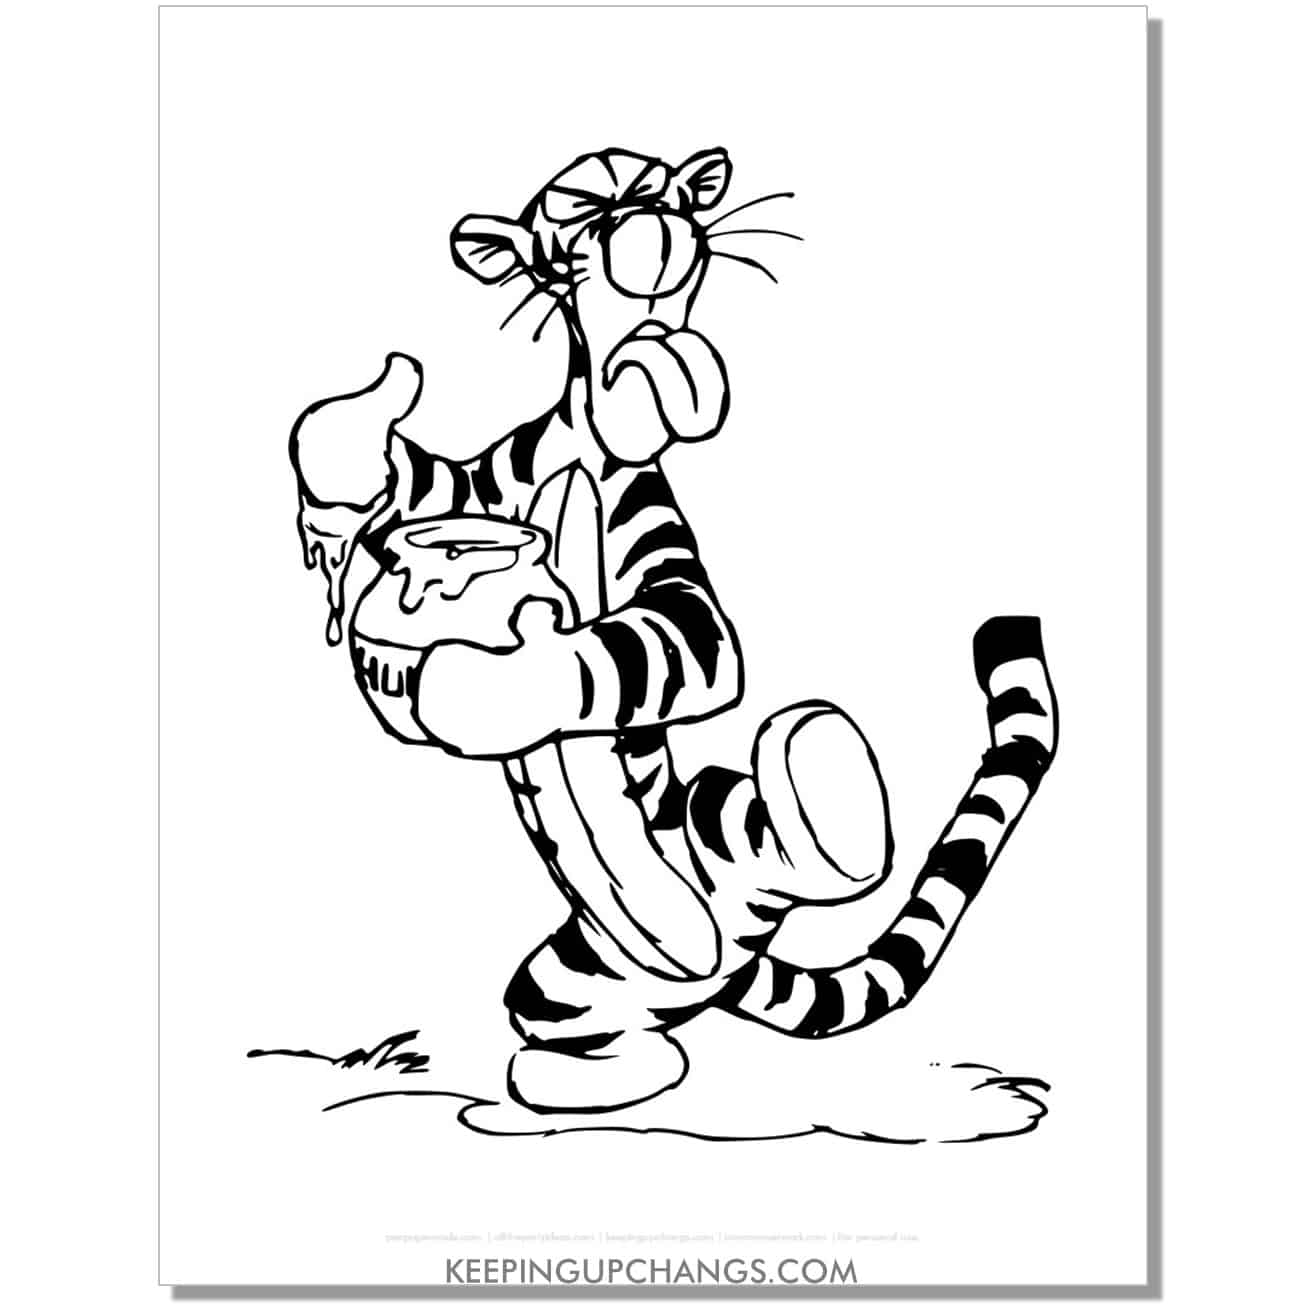 tigger spits honey out coloring page, sheet.